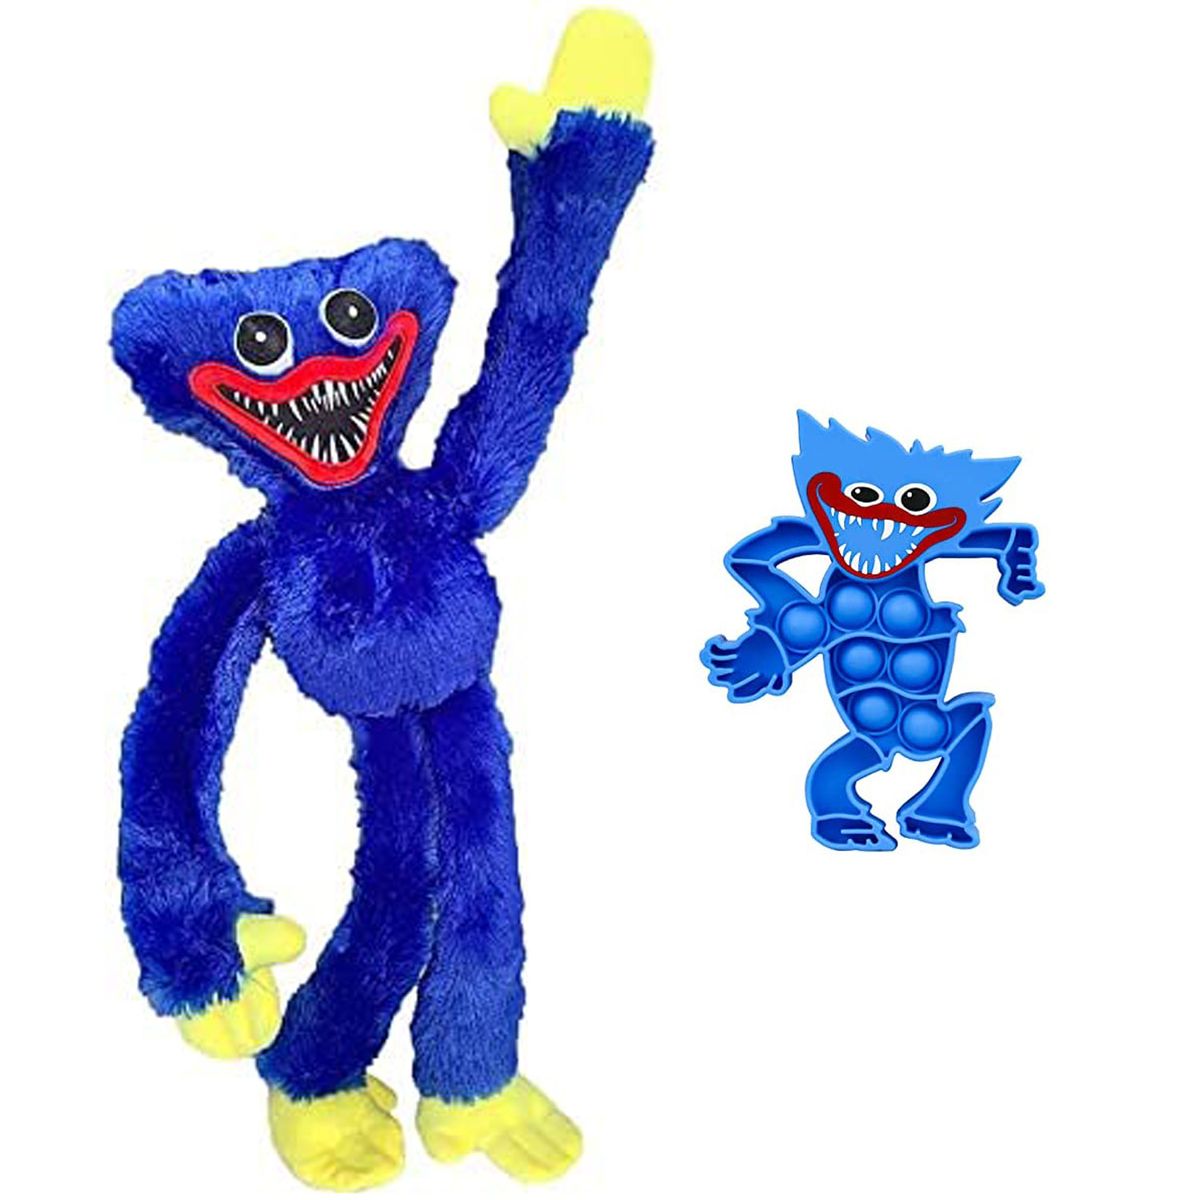 100cm Colorful Wuggy Huggy Toy Horror Game Plush